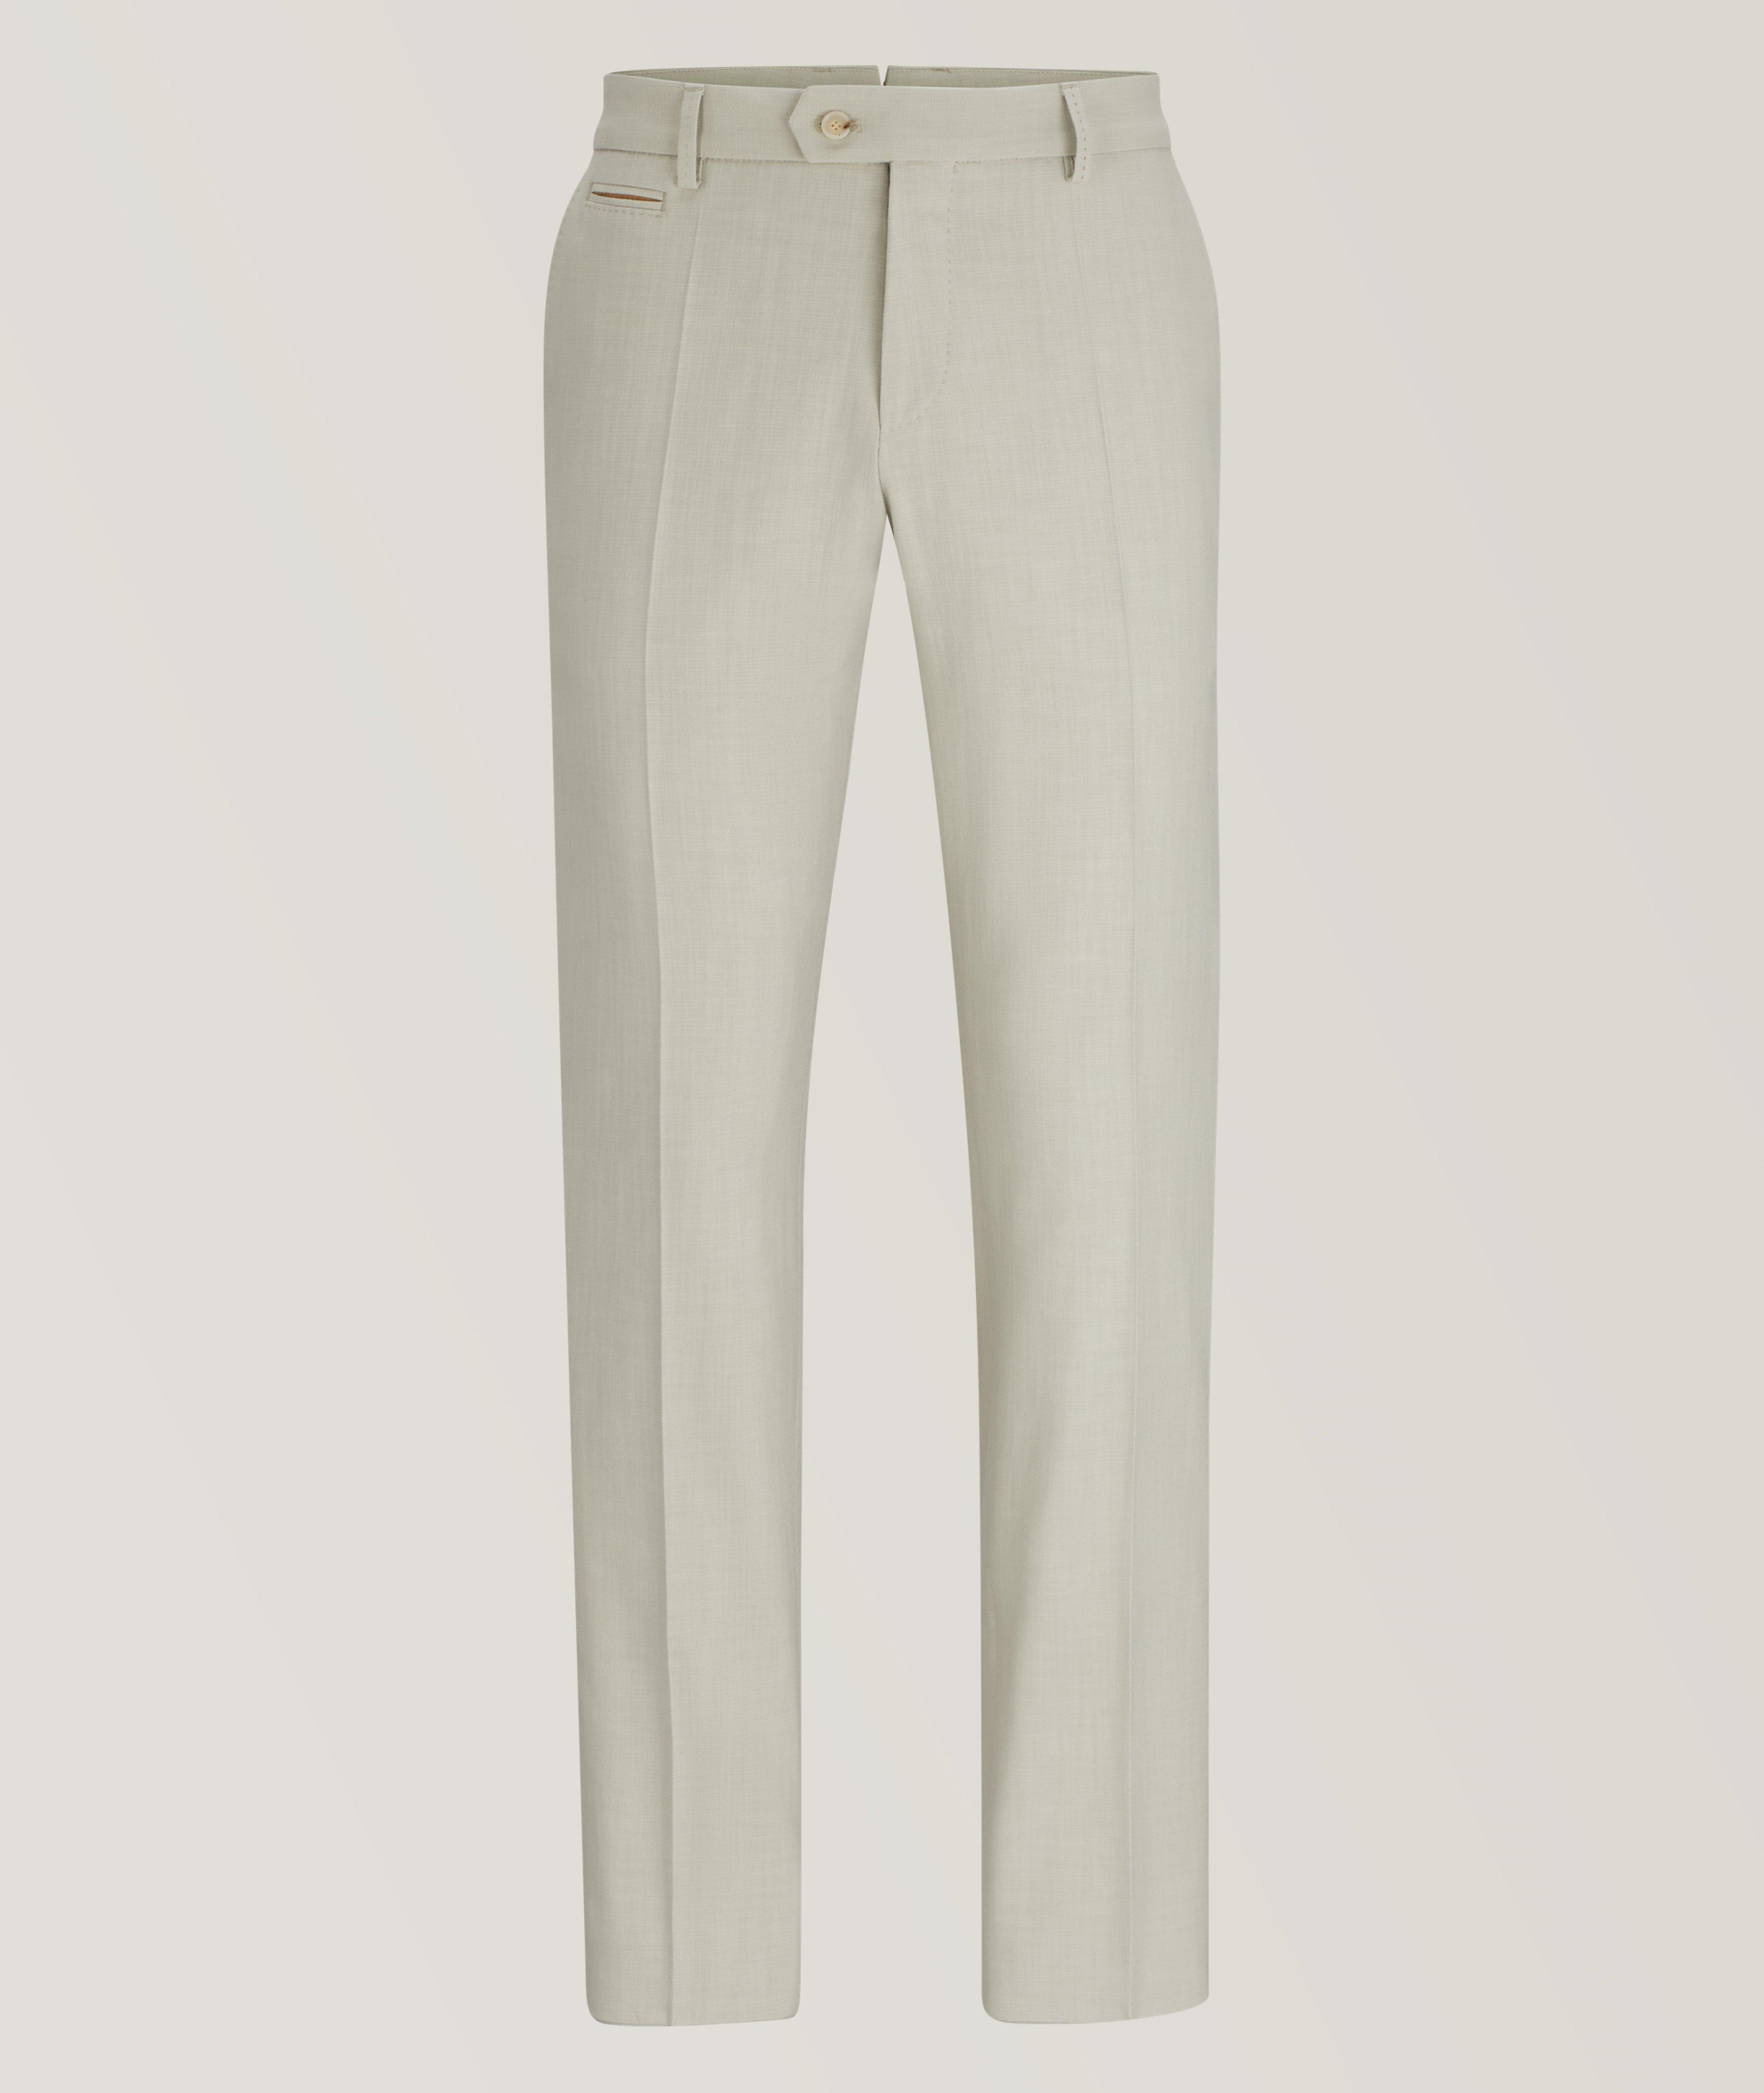 Micro Patterned Stretch-Cotton Trousers image 0